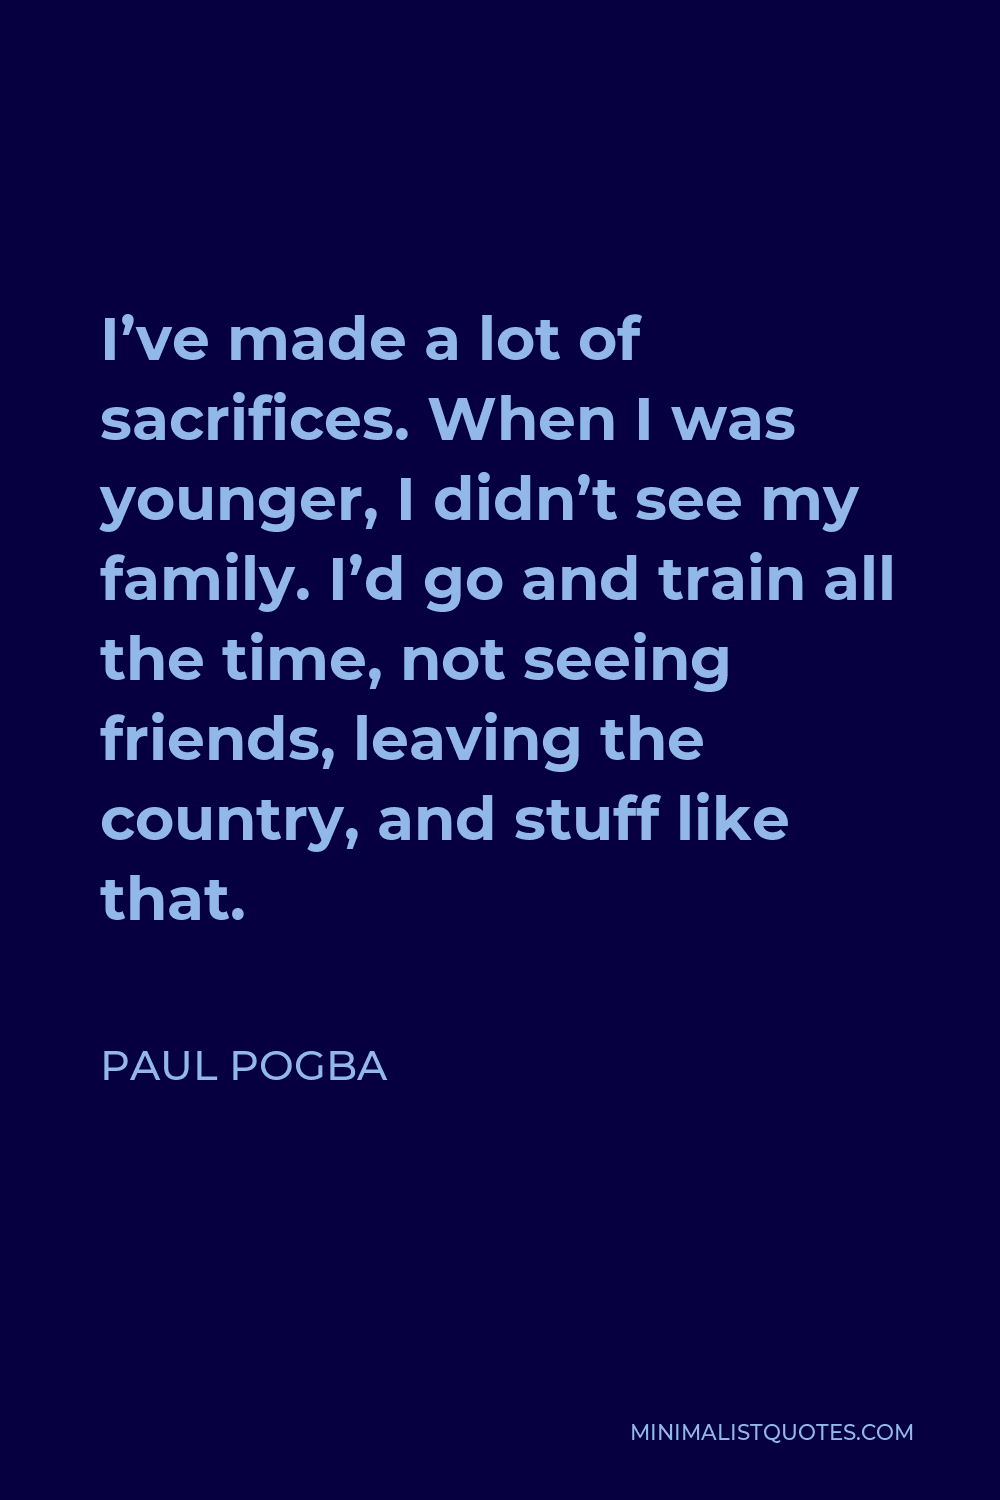 Paul Pogba Quote - I’ve made a lot of sacrifices. When I was younger, I didn’t see my family. I’d go and train all the time, not seeing friends, leaving the country, and stuff like that.